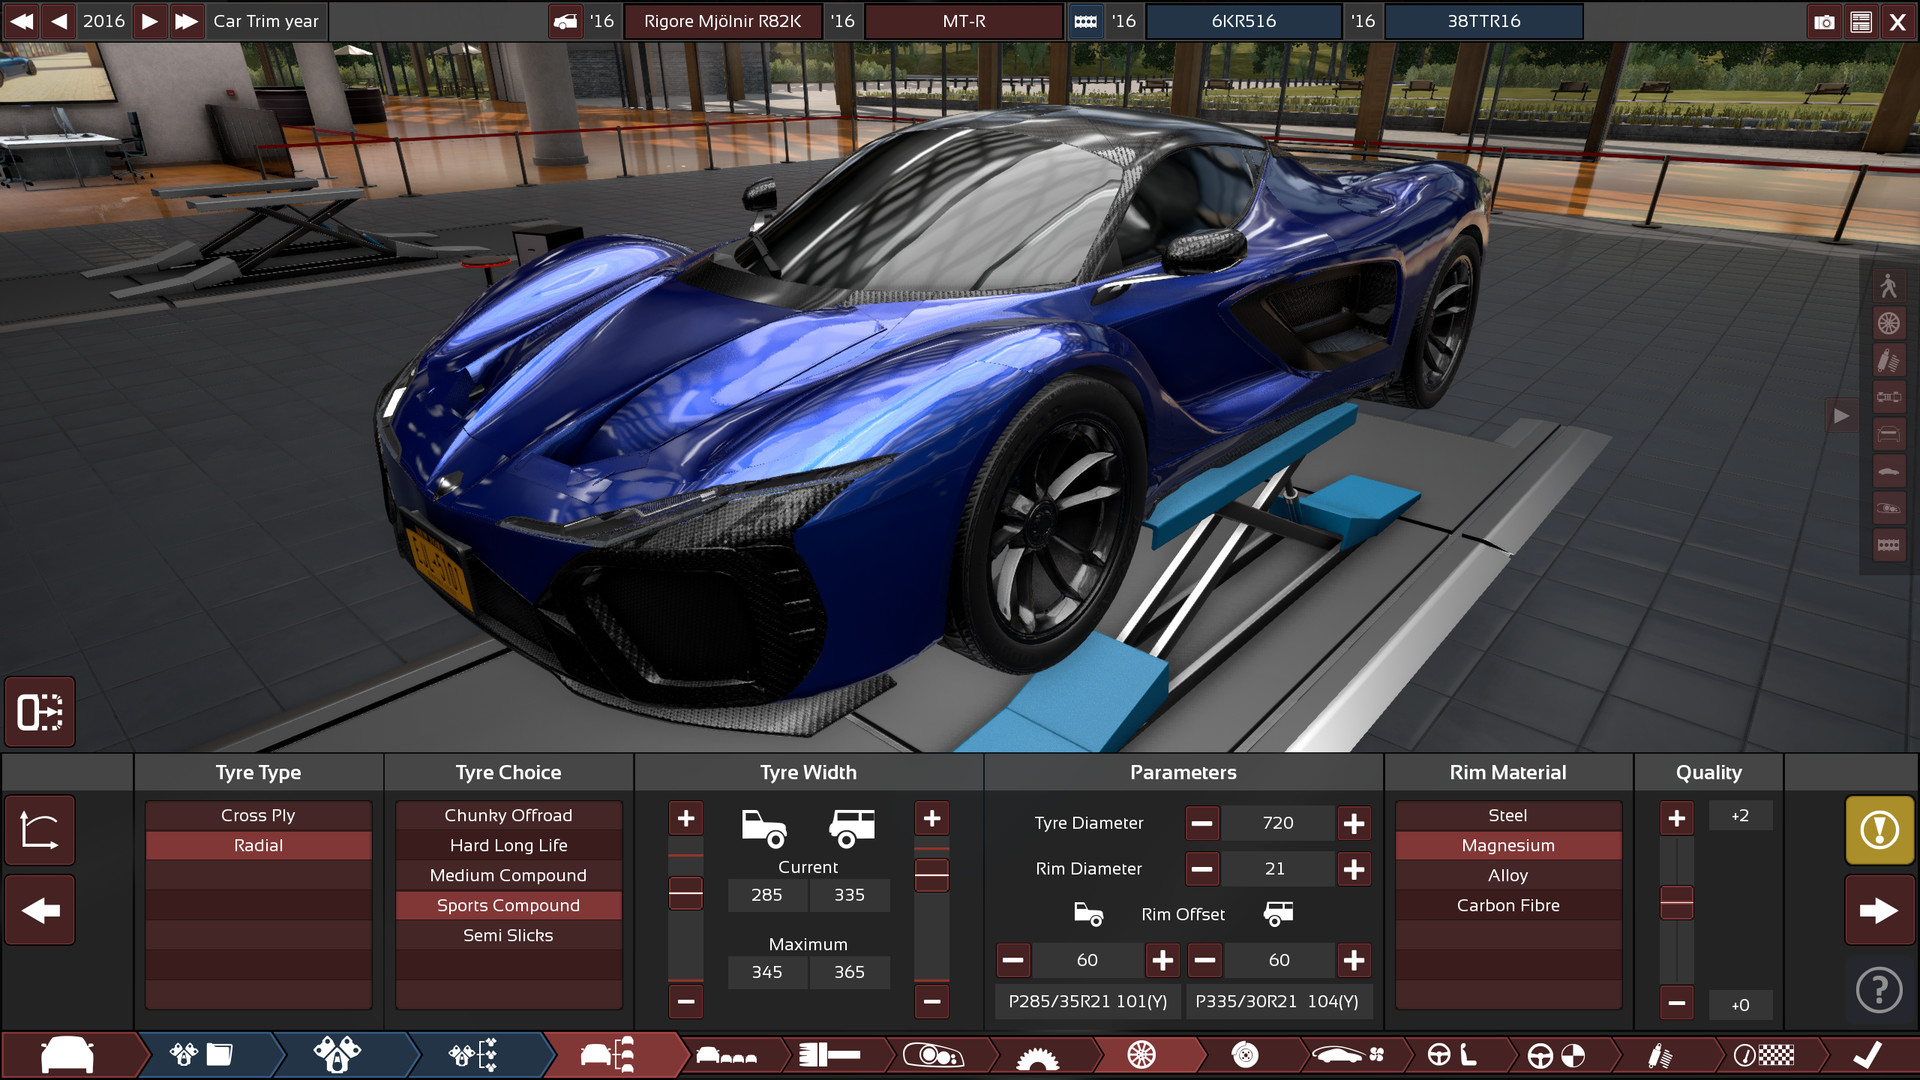 Vehicle Tycoon Codes May 2020 - codes for roblox vehicle tycoon 2020 may